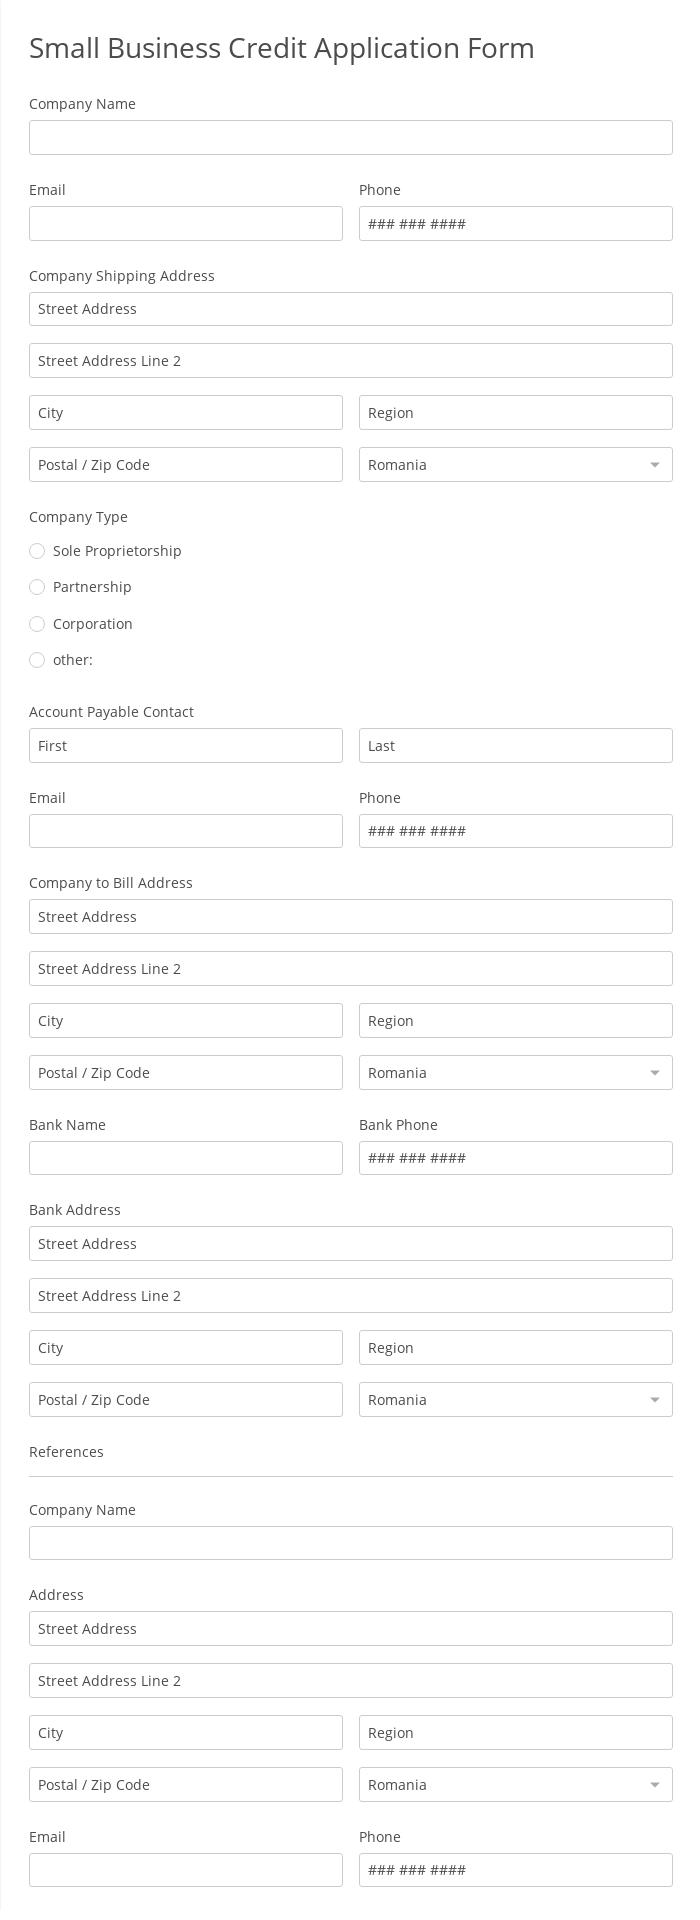 Small Business Credit Application Form